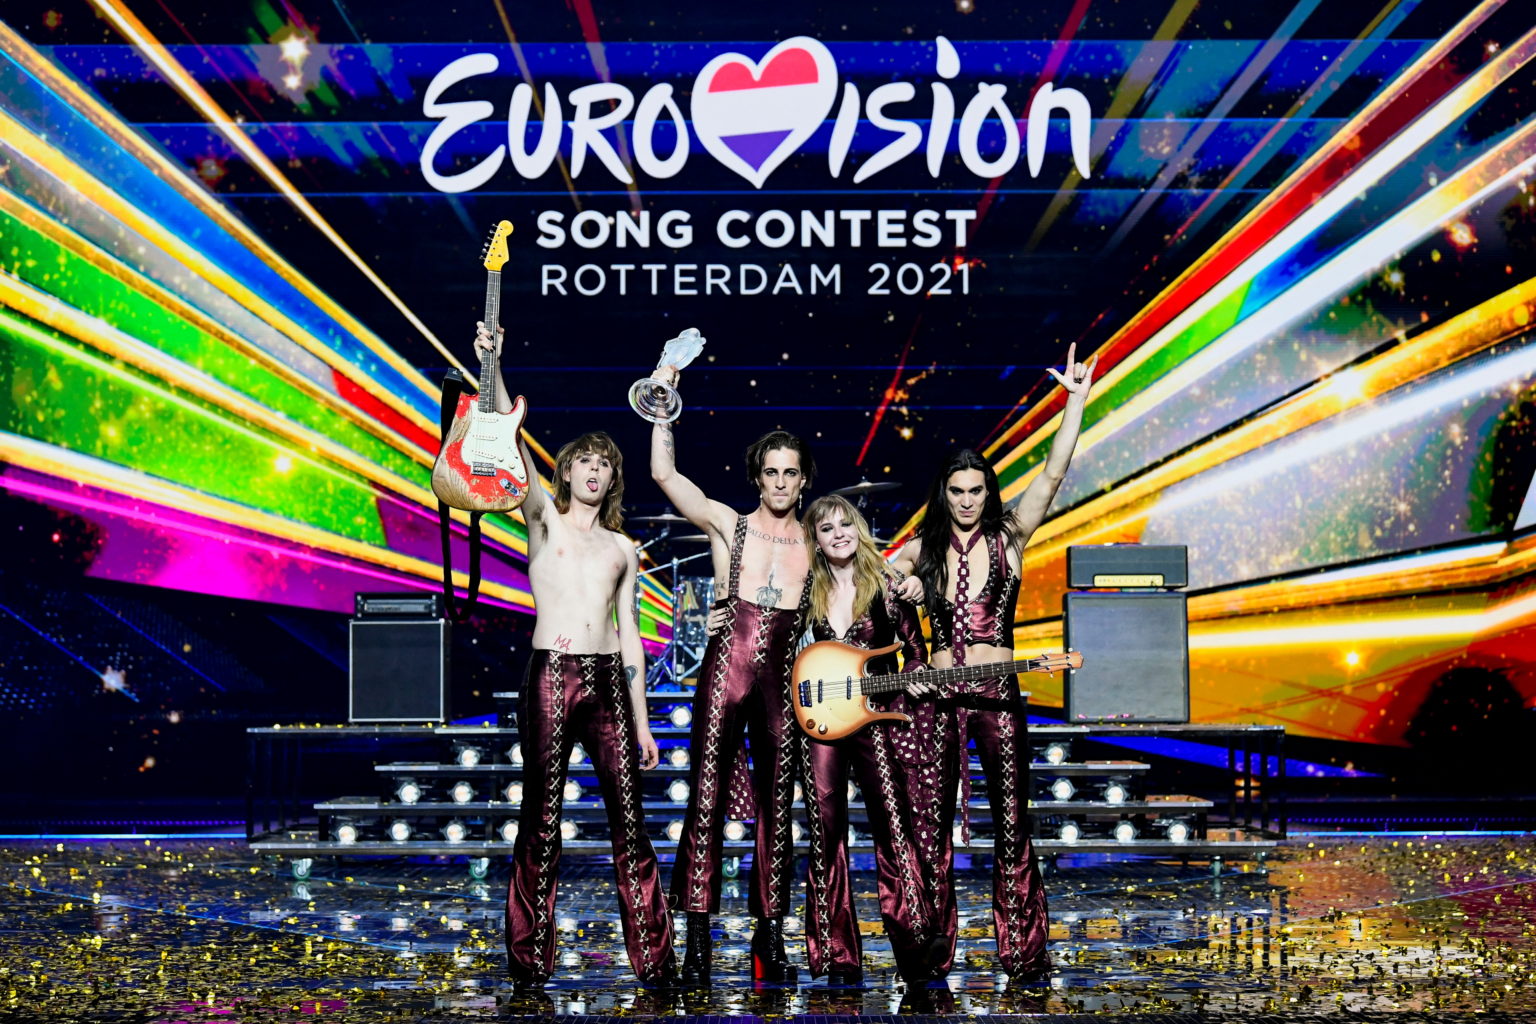 Italy's raucous glam rock takes Eurovision by storm ...